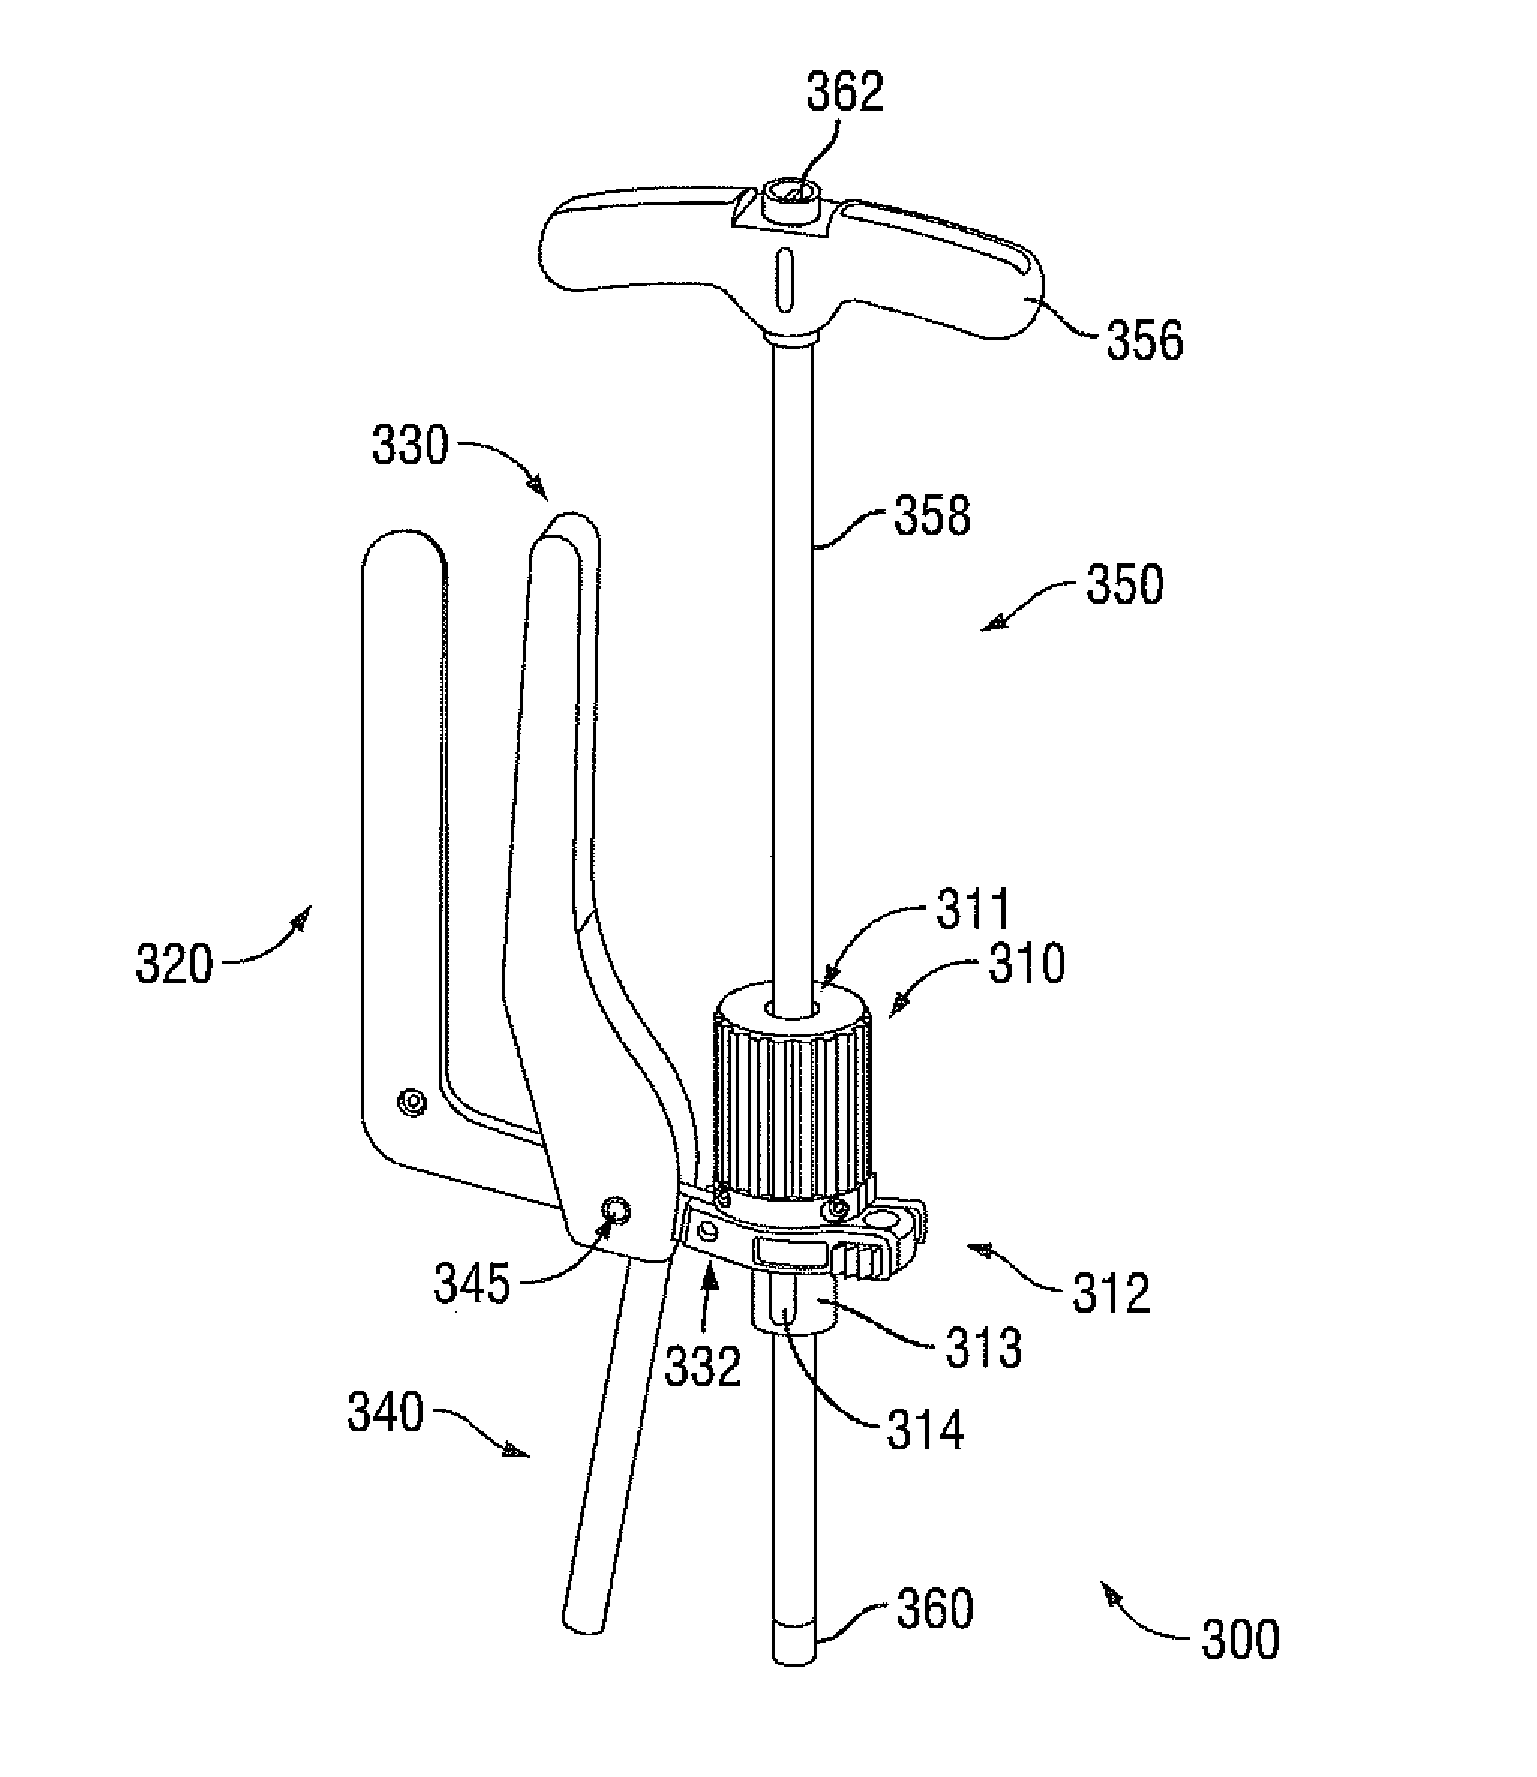 Surgical instrument with integrated reduction and distraction mechanisms